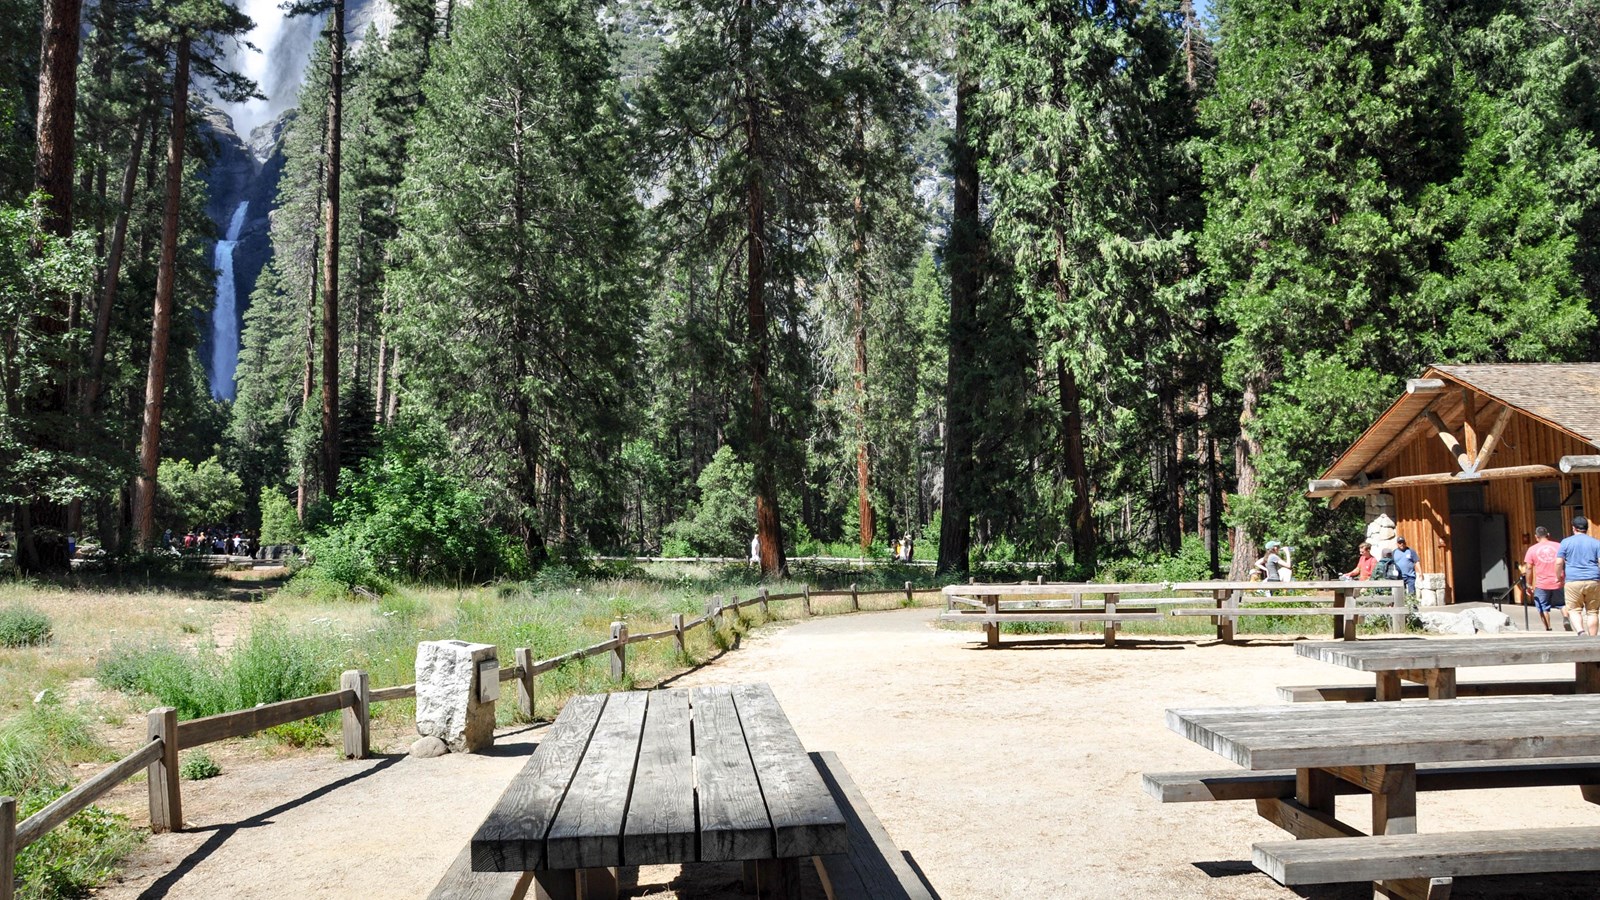 Wooden picnic tables, restroom building and waterfall in background